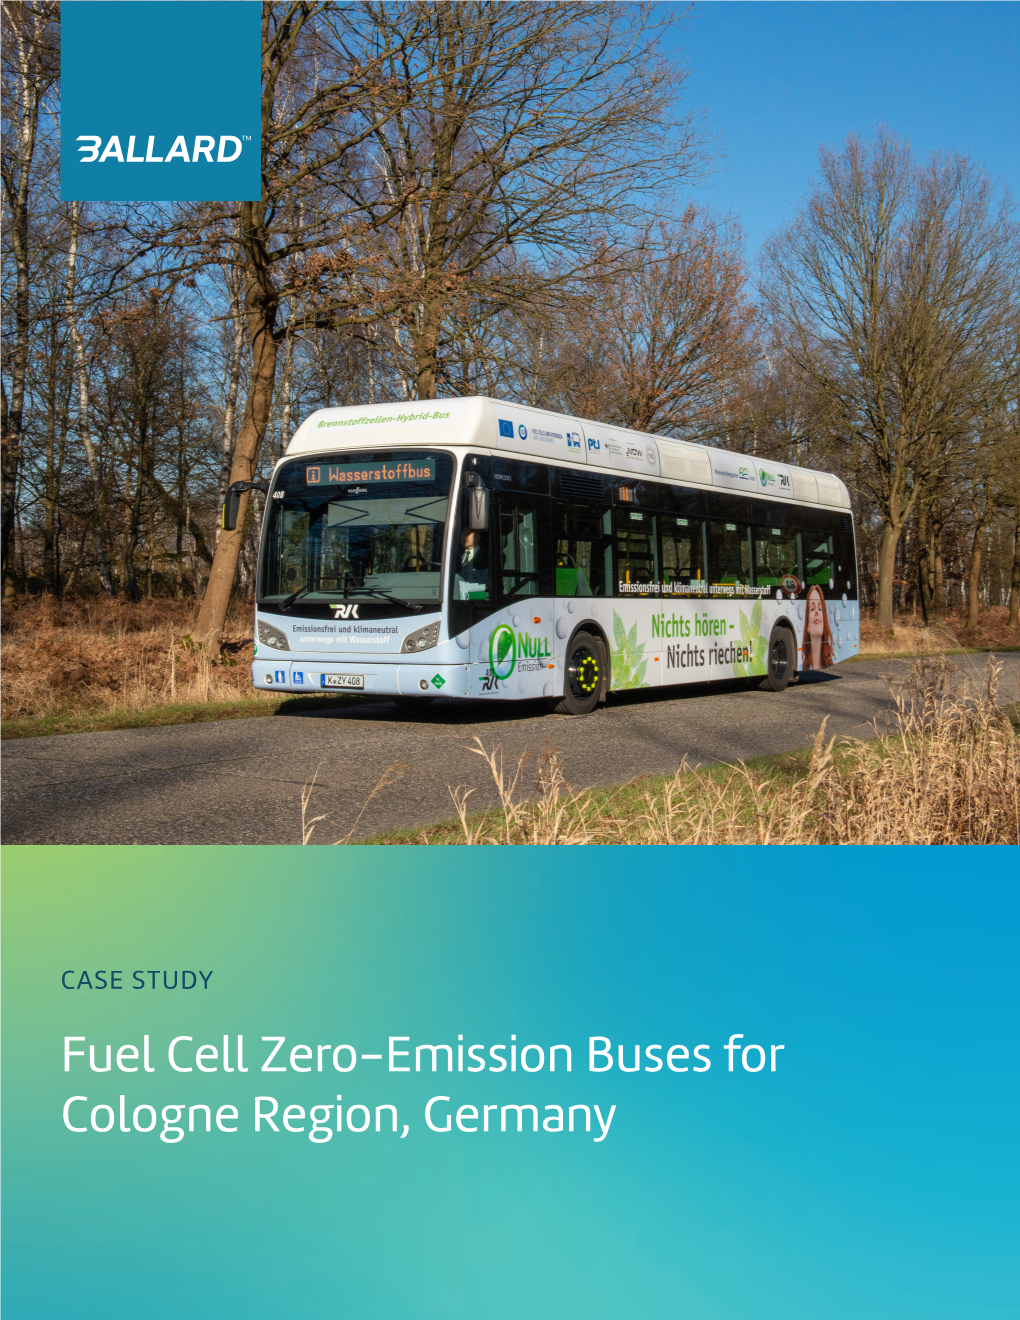 Fuel Cell Zero-Emission Buses for Cologne Region, Germany Fuel Cell Zero-Emission Buses for Cologne Region, Germany